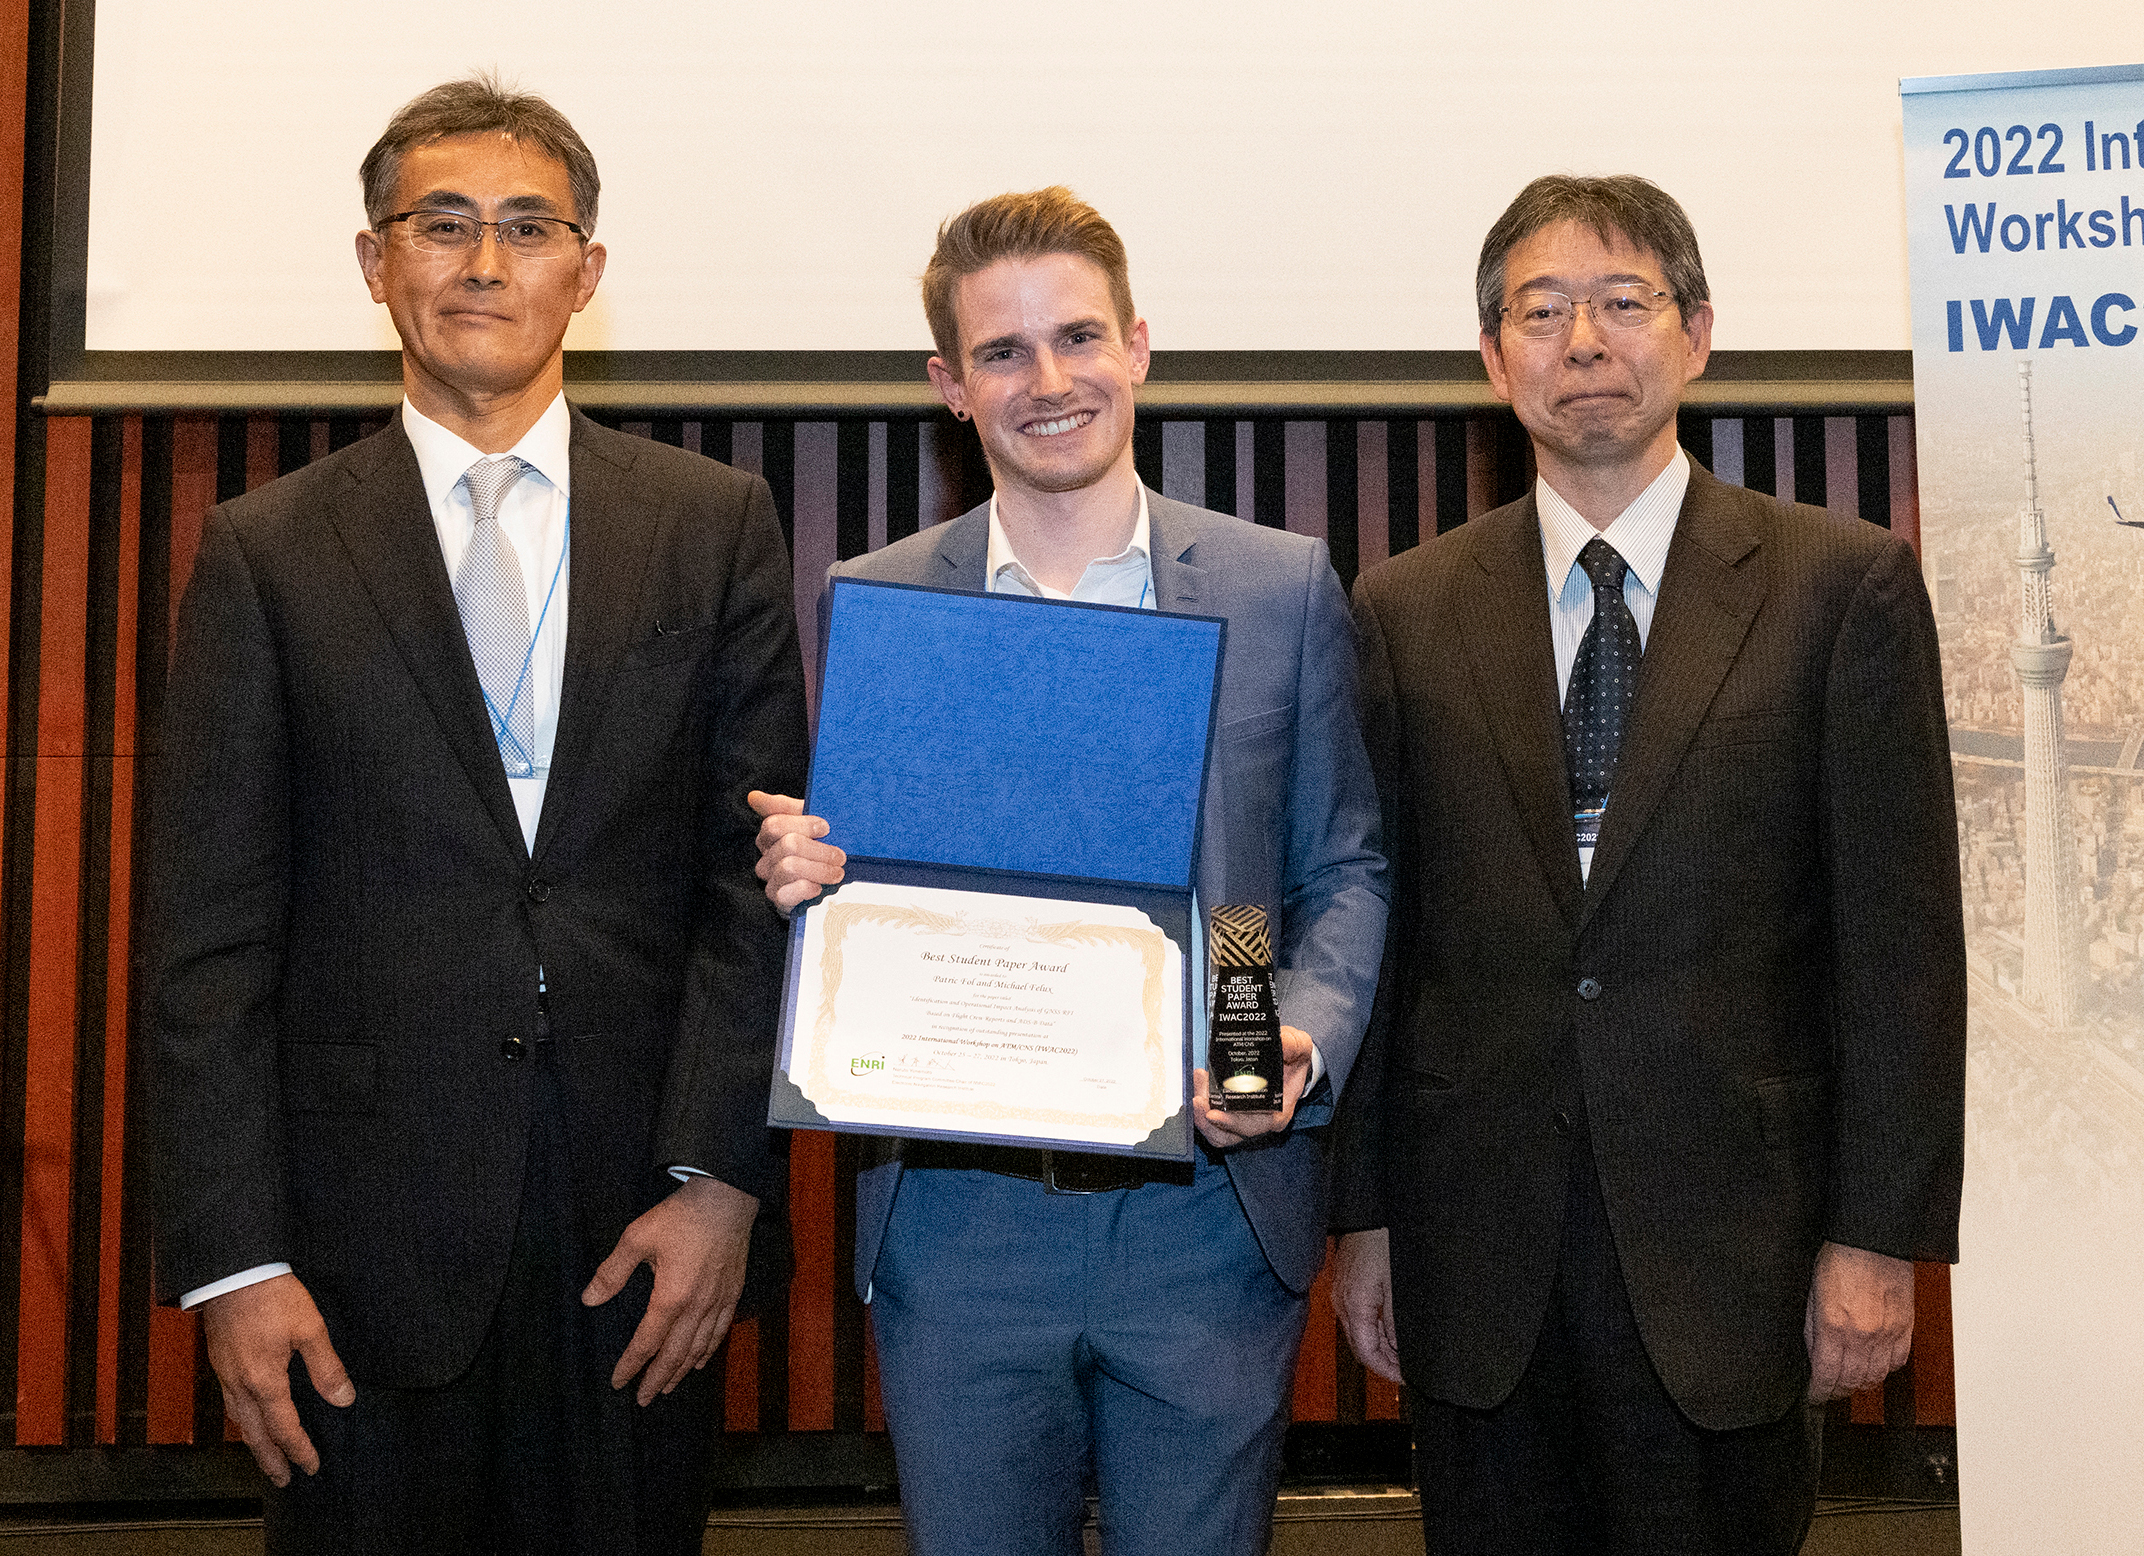 Photo taken at the award ceremony:Three smiling men in suits. Patric Fol is in the center, holding an award certificate.